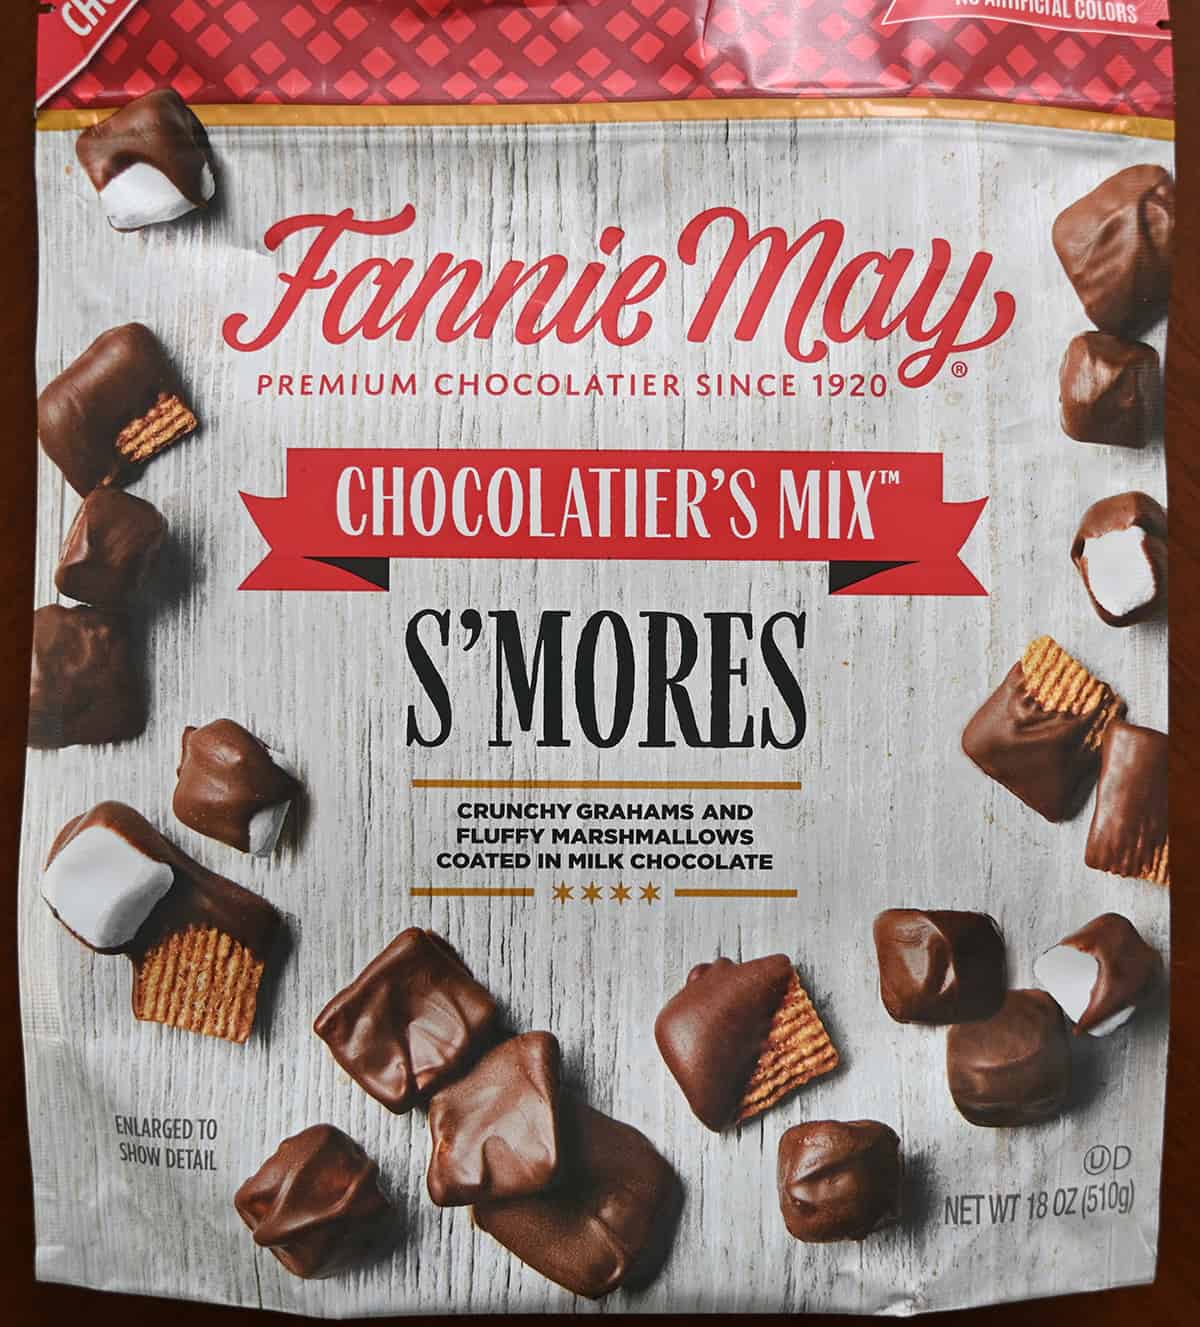 Closeup image of the front of the bag of s'mores mix showing how big the bag is and the product description.